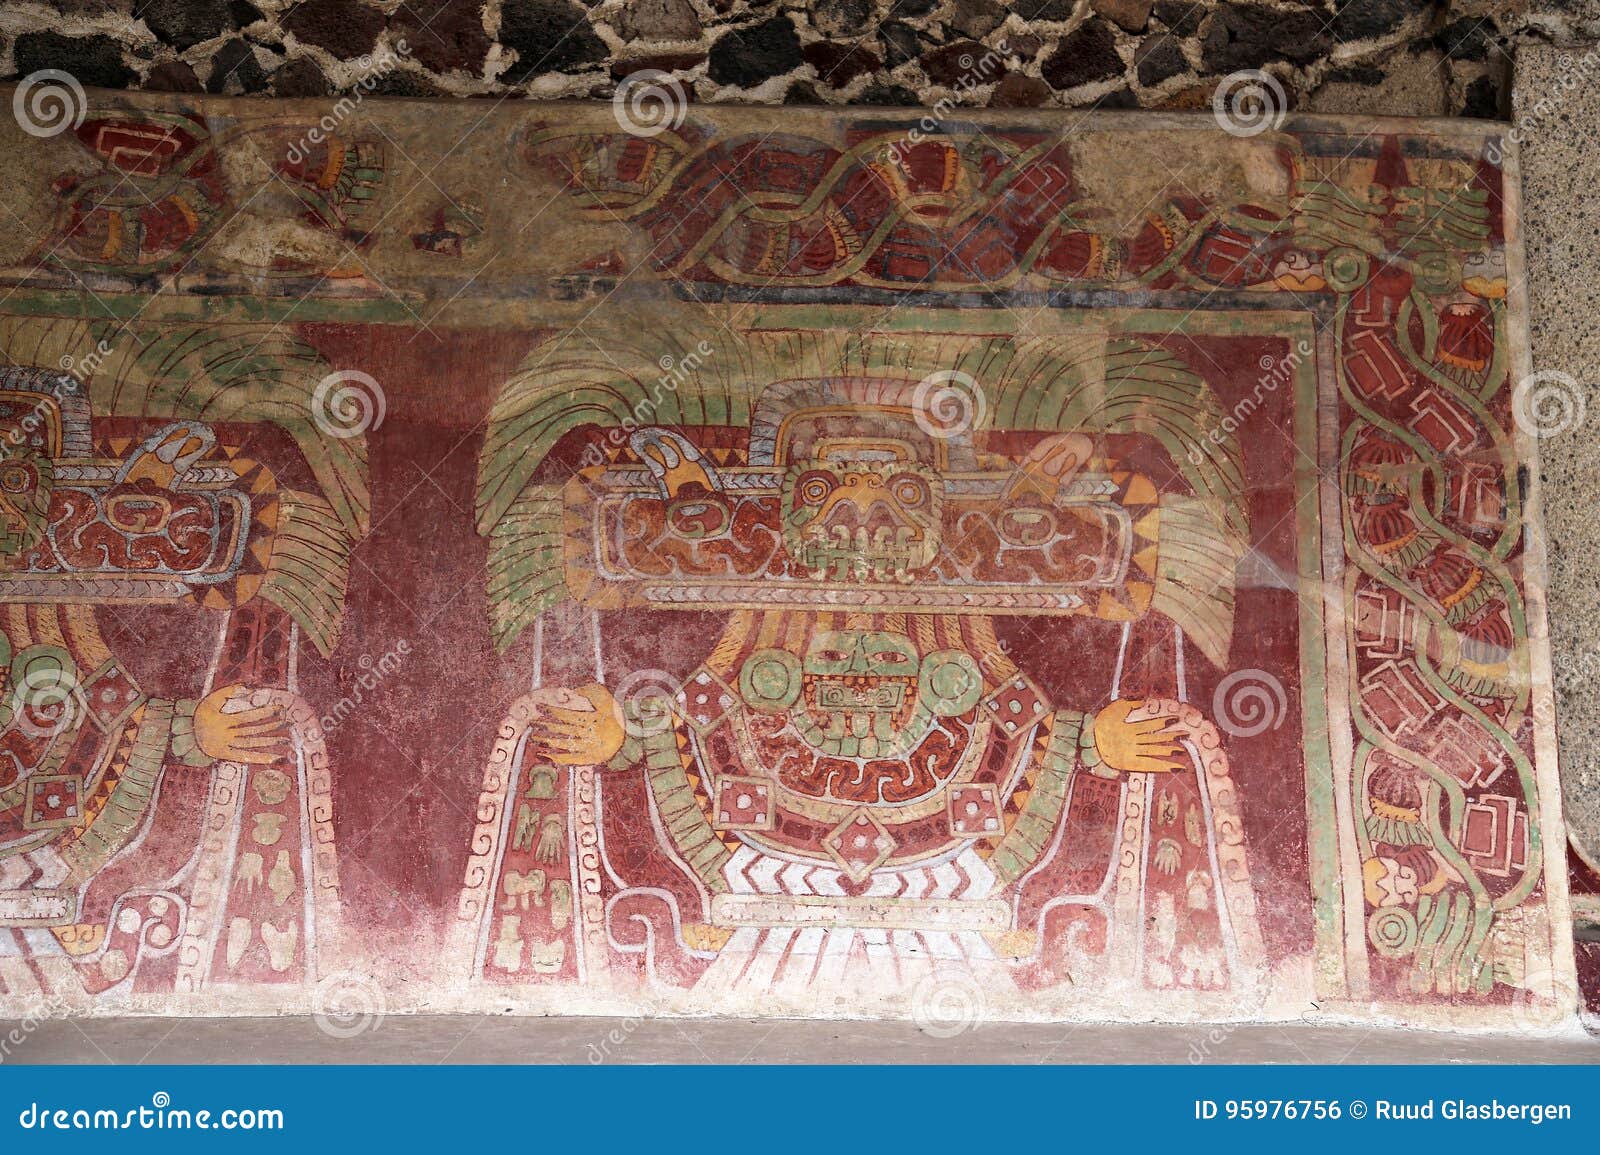 wall paintings on the pyramids of teotihuacan, mexico.